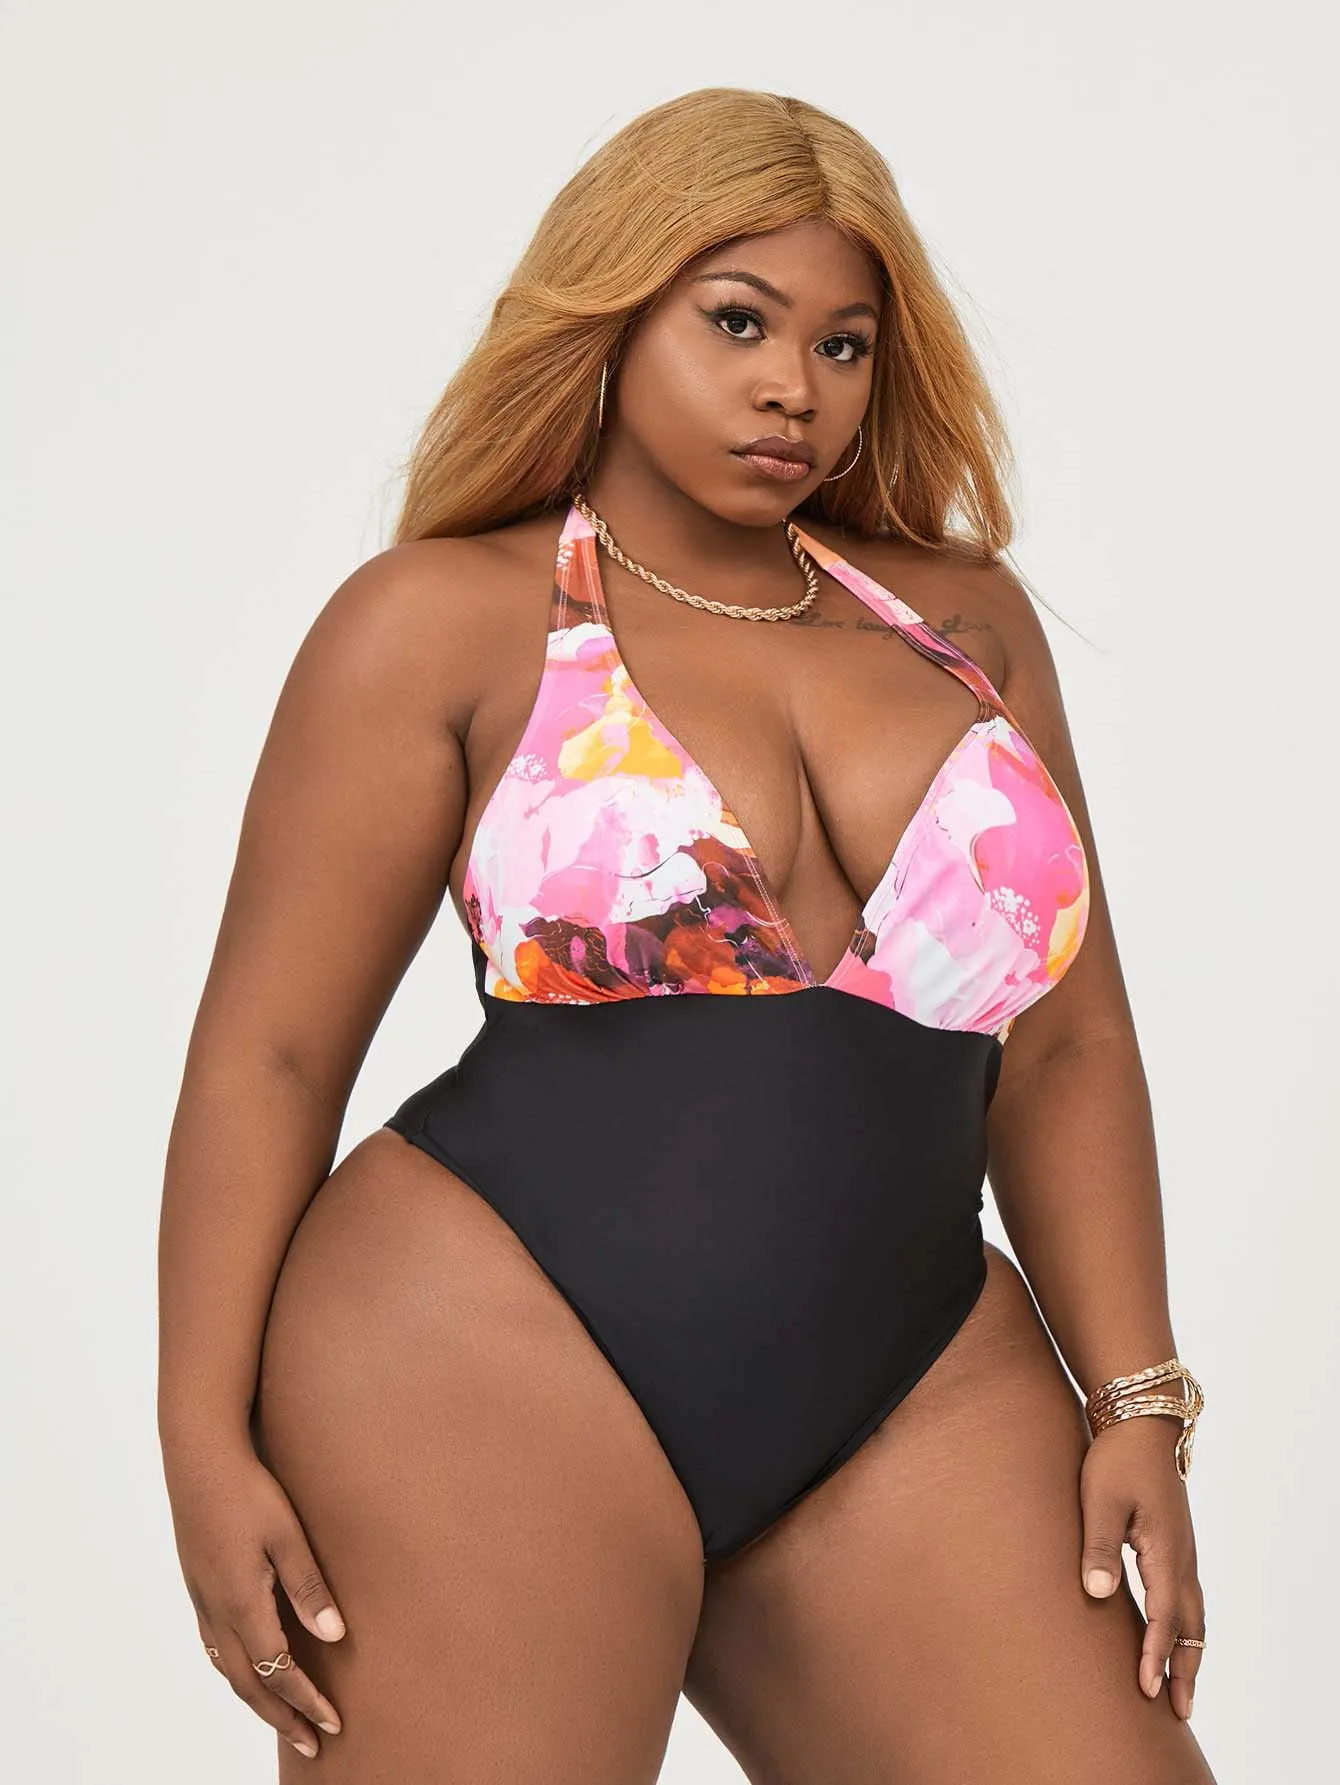 Plus Size One Piece Swimsuit For Women, Multicolor Print, No Bra Underwire,  Support, Summer Swimwear From Lindaswimsuit, $21.23